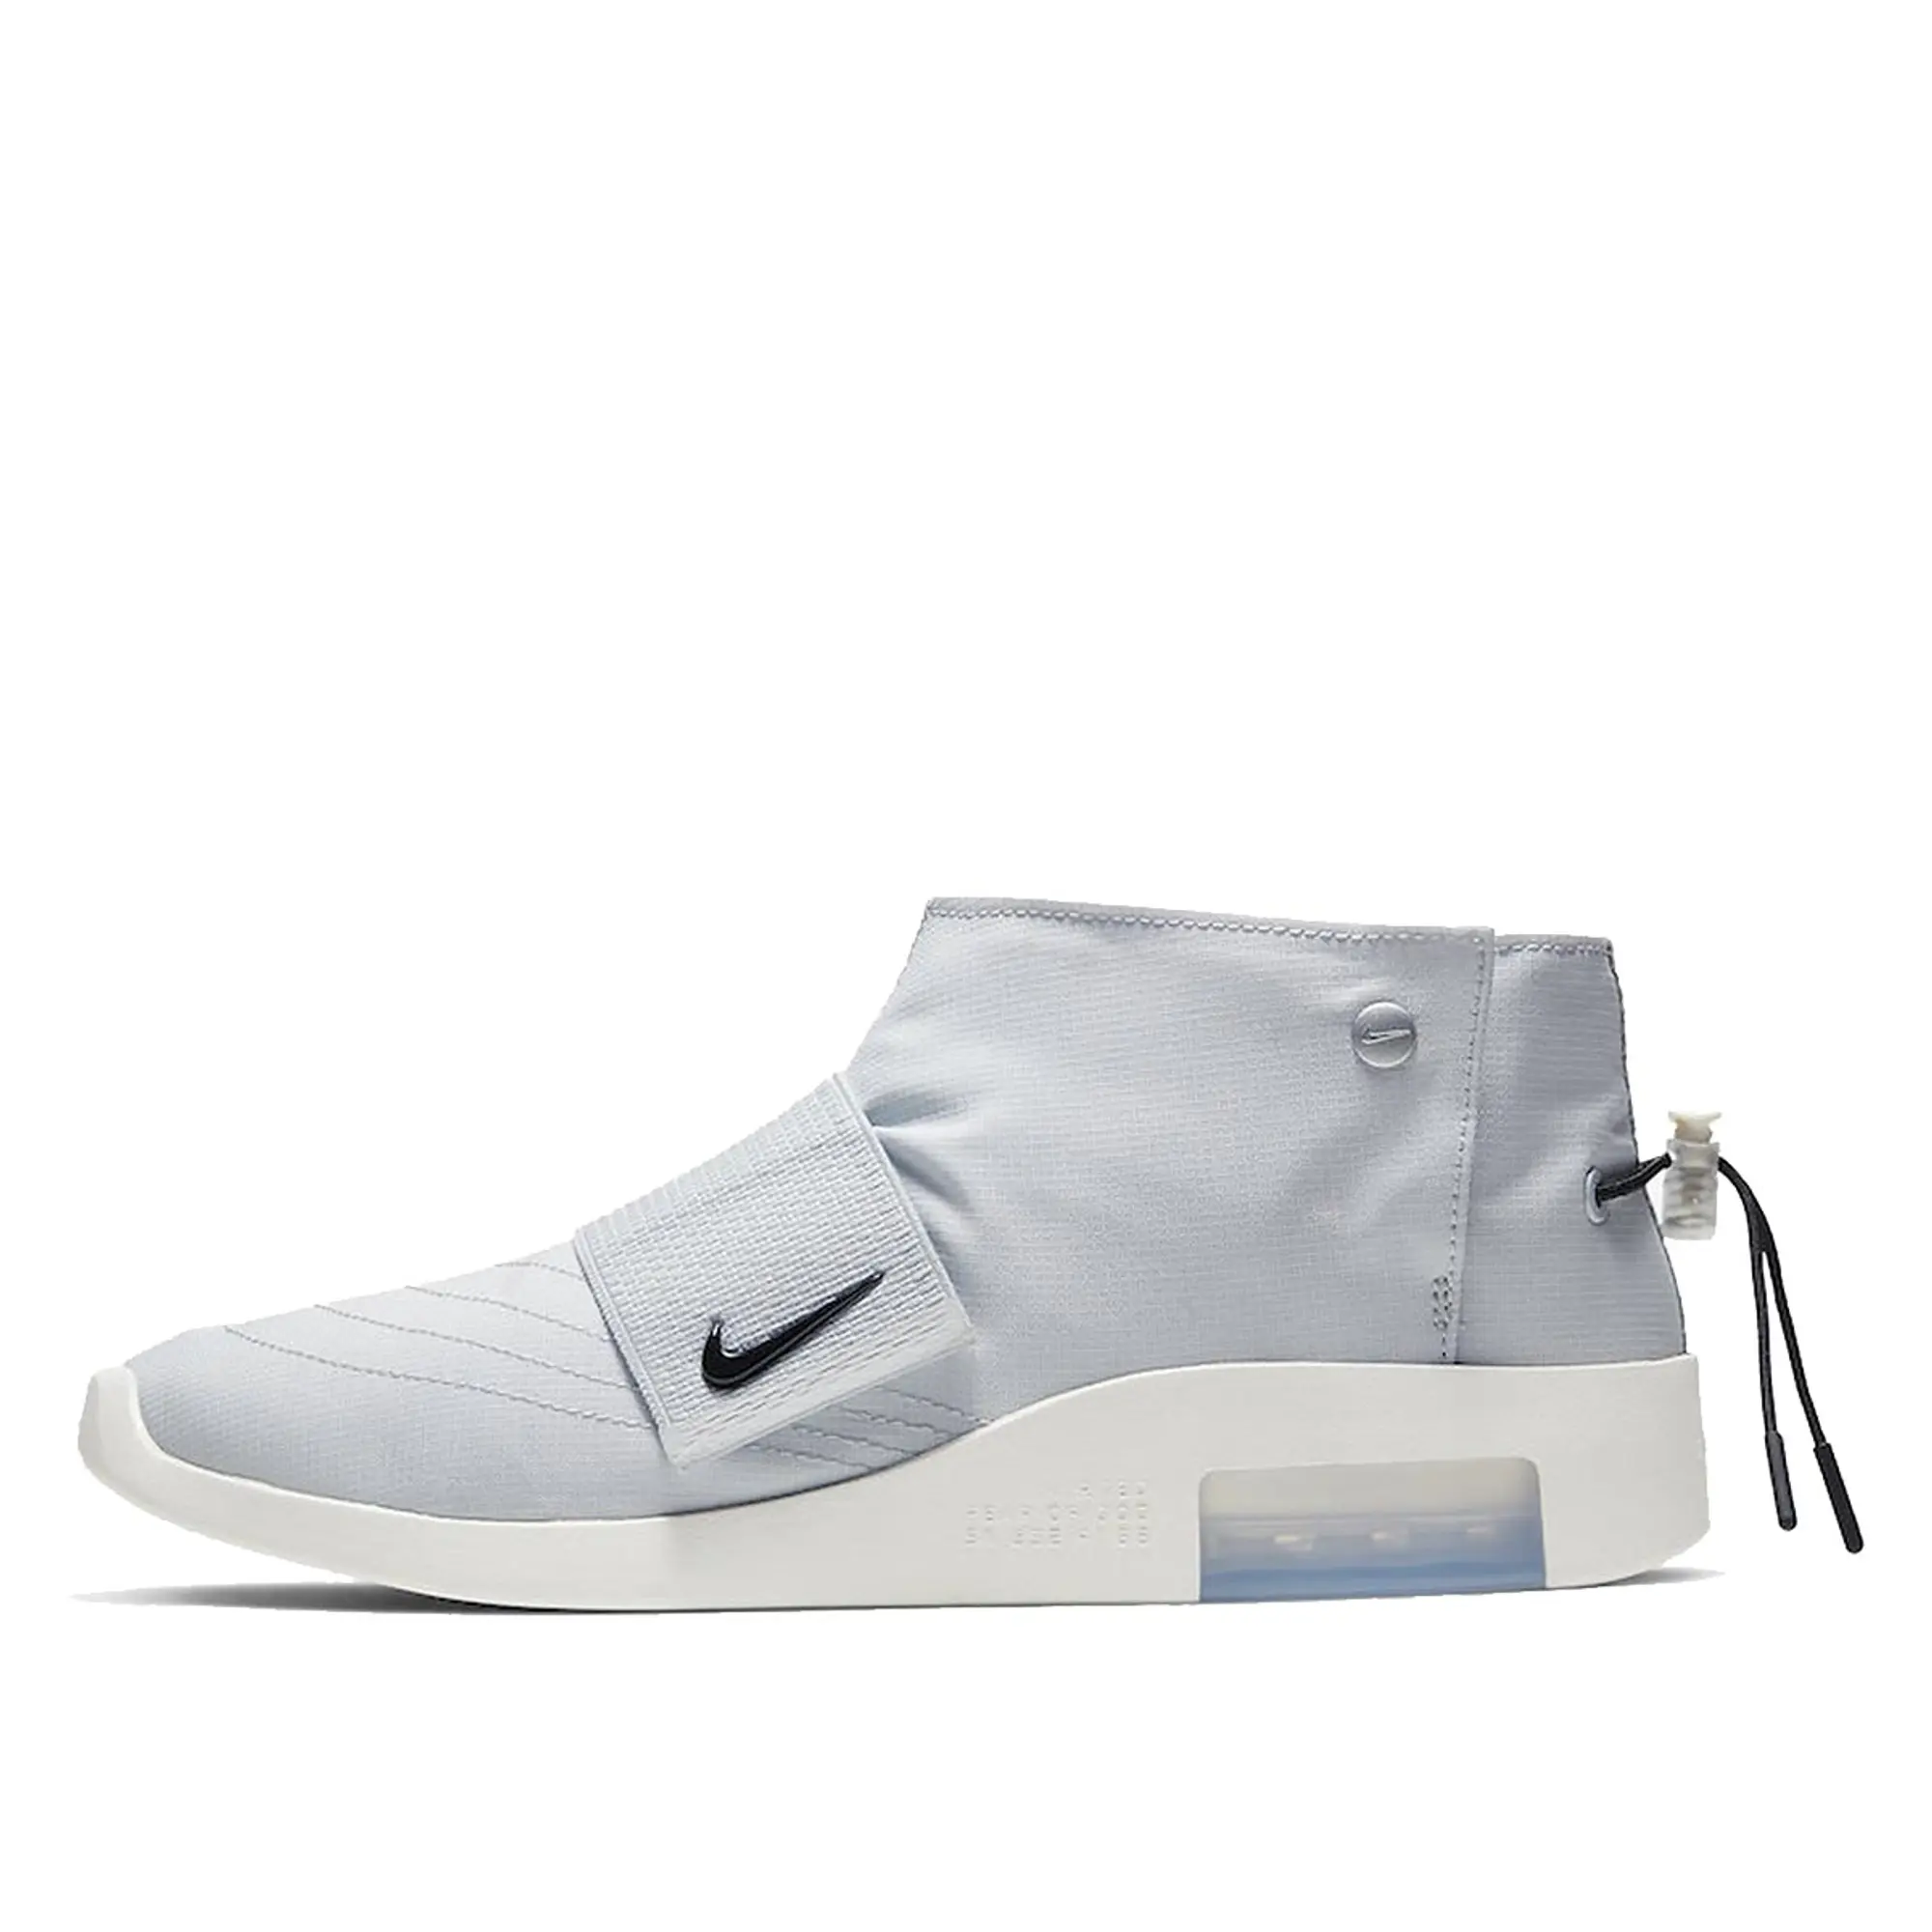 Nike Air Fear of God Moccasin Pure Platinum